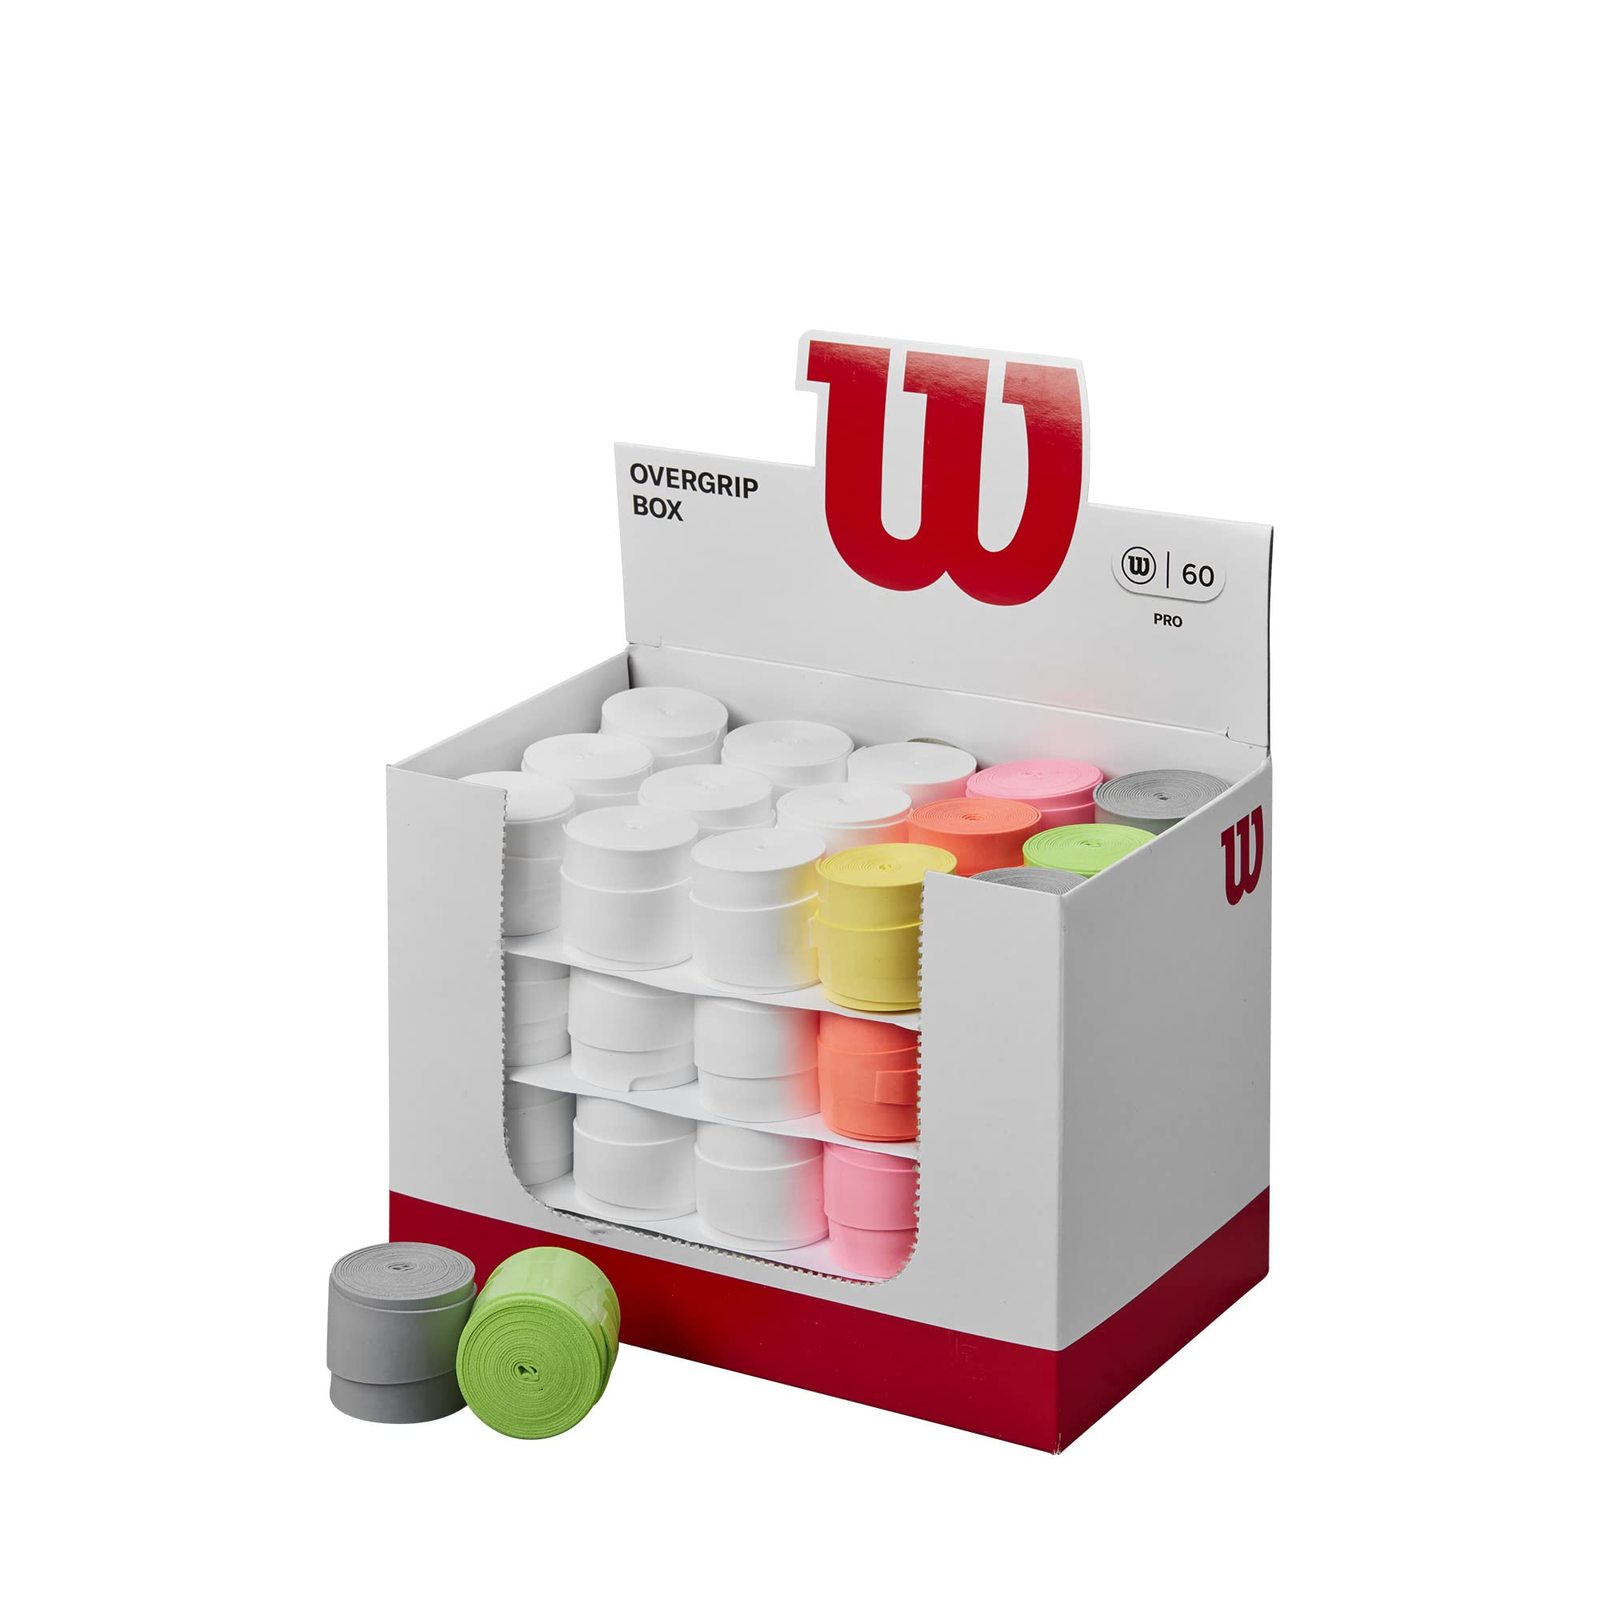 WILSON Perforated Pro Tennis Racquets Over Grip, Green - $12.69 - $45.45